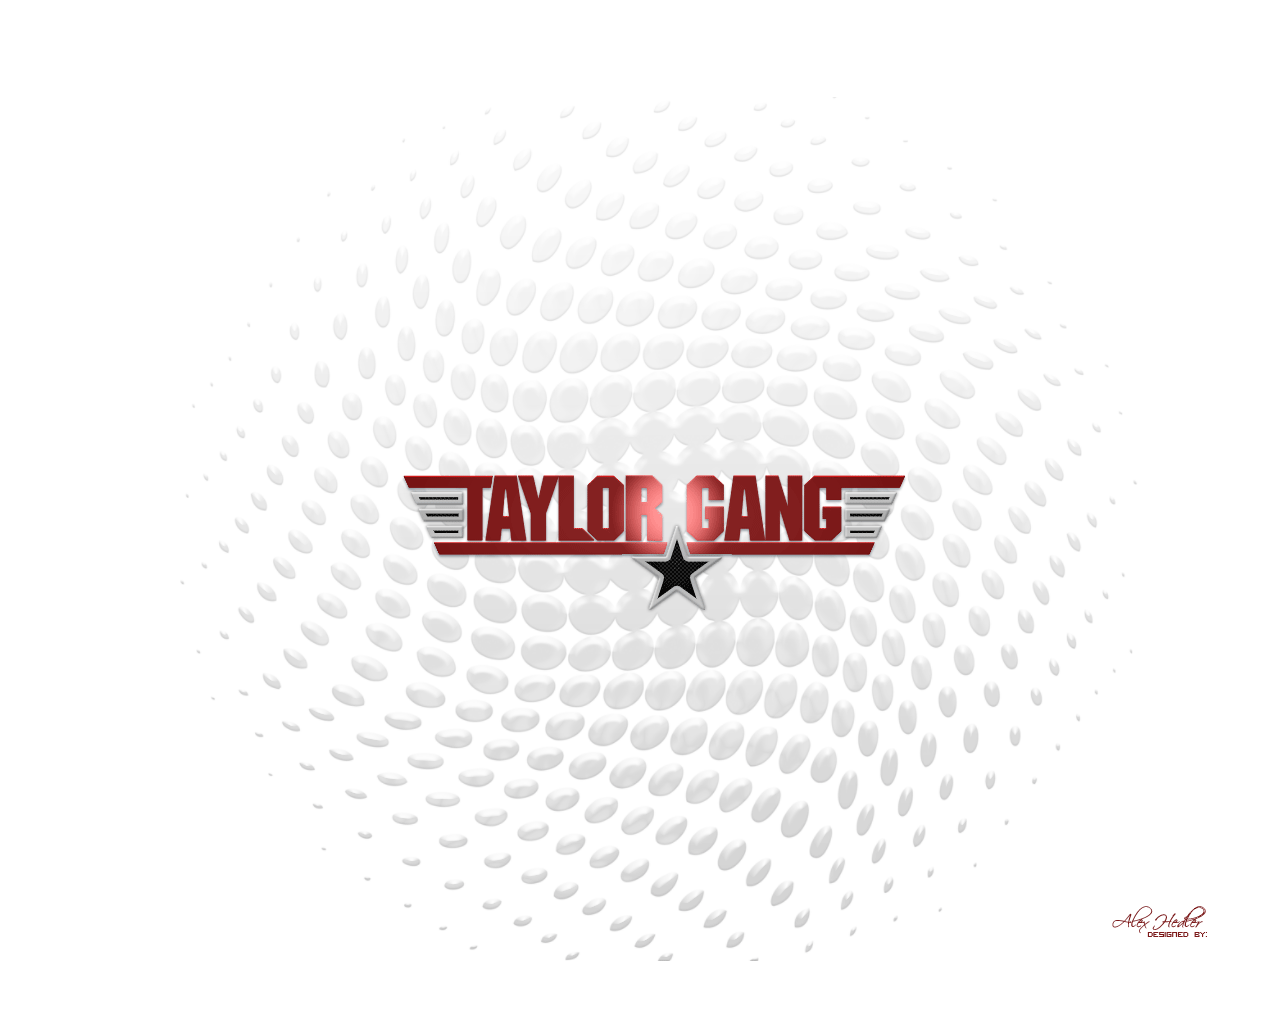 TAYLOR GANG WALLPAPER 2 by AlexHedler on